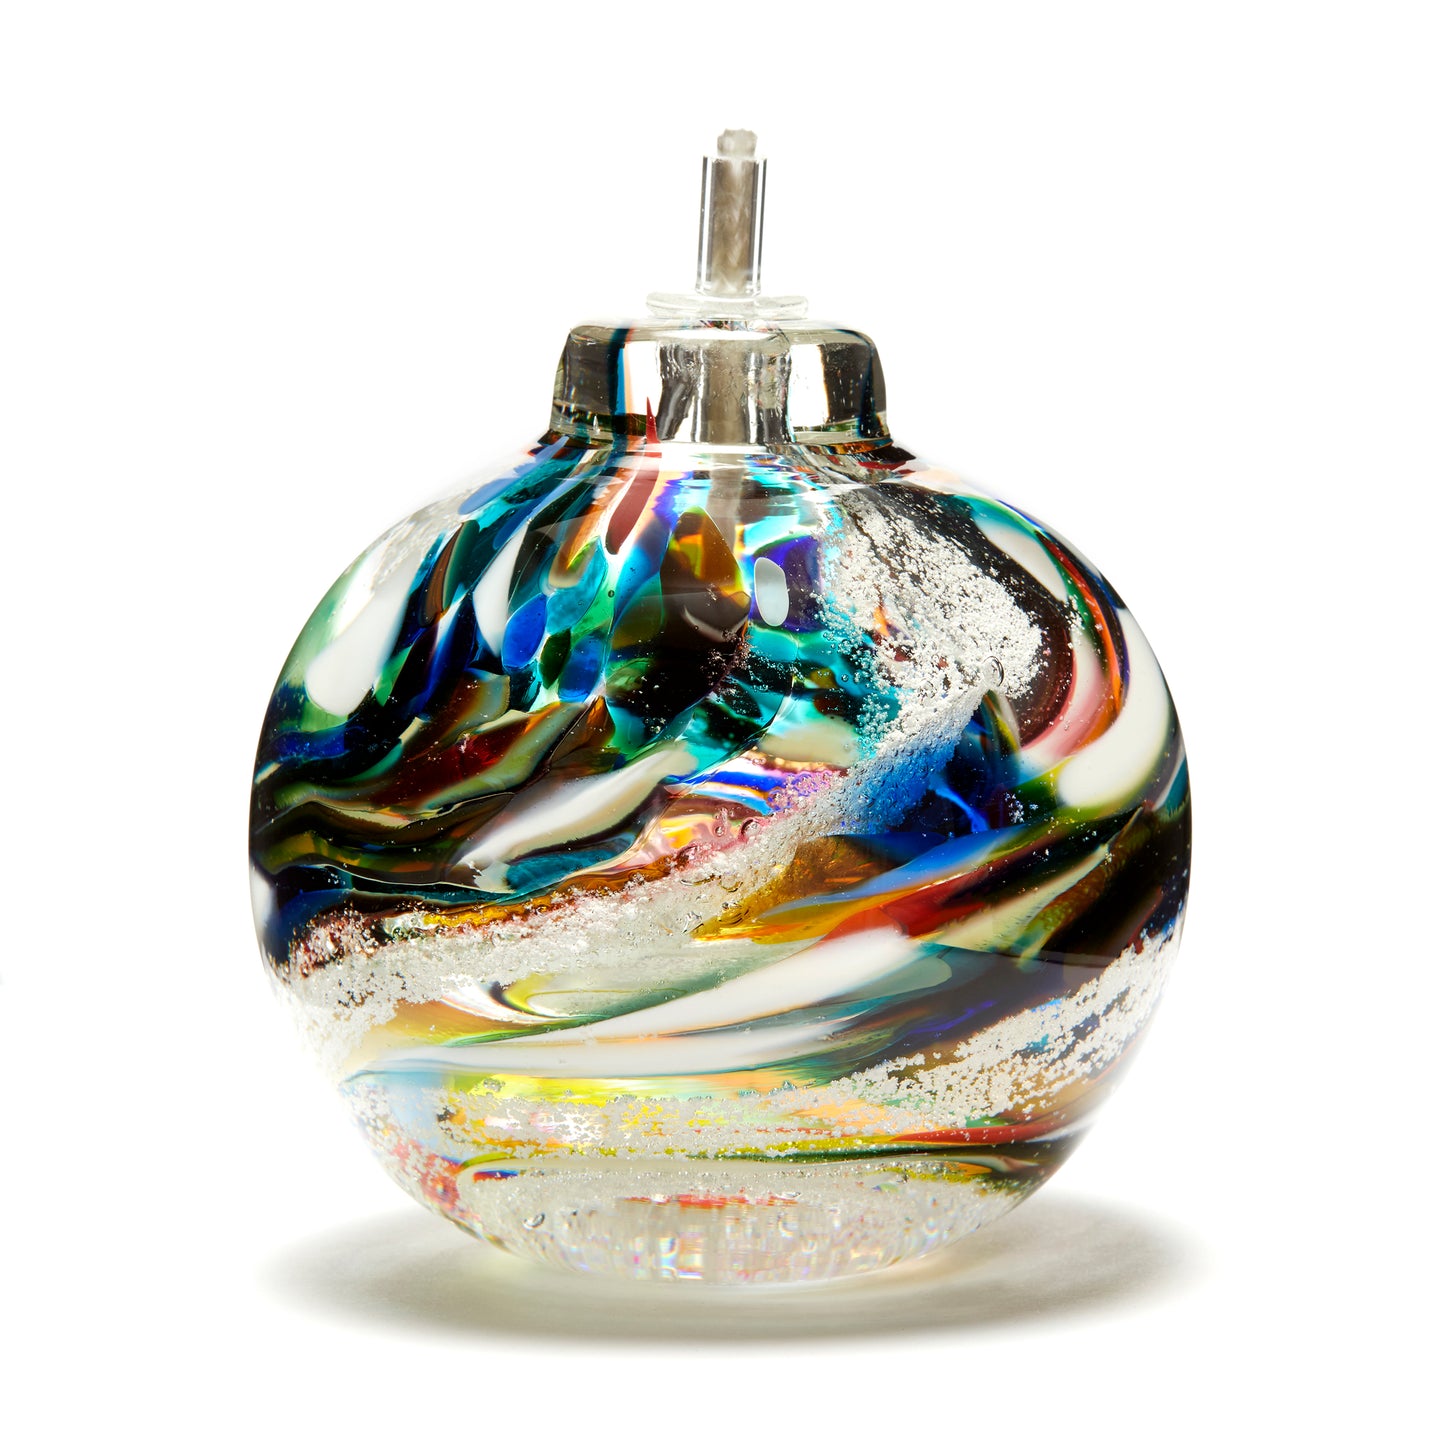 Round memorial glass art eternal flame oil lamp with cremation ash. Purple, blue, yellow, red, orange, green, and white glass. Colour combination is called "Multi."